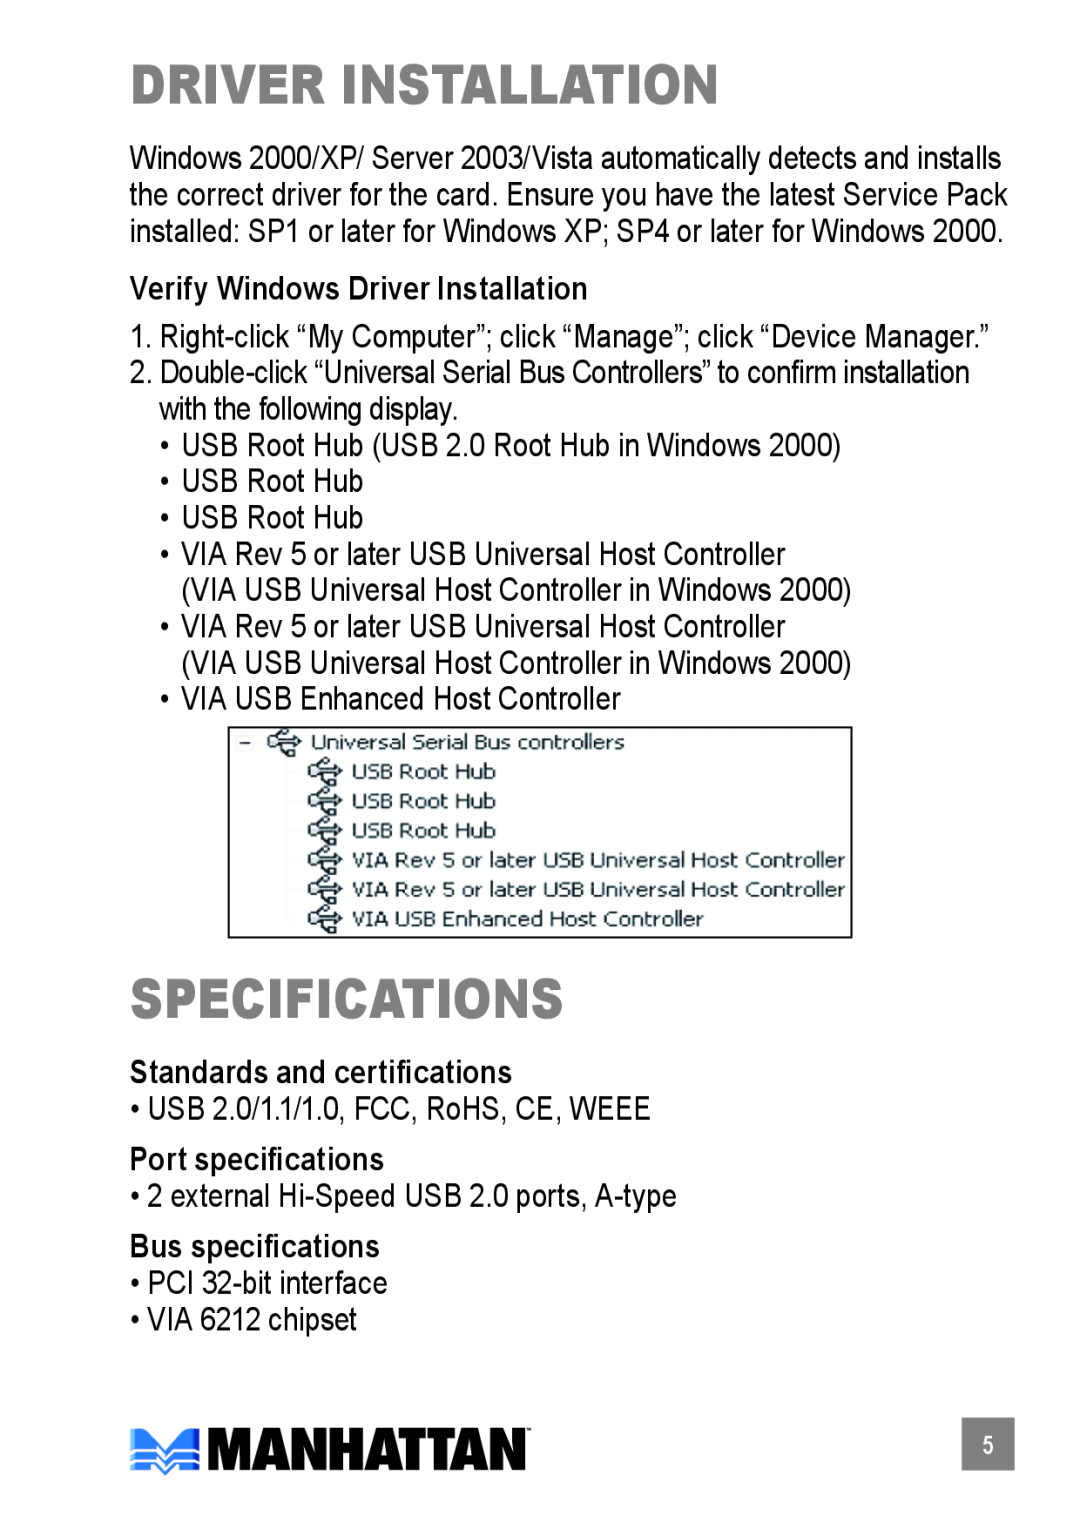 Manhattan Computer Products 167741 manual driver installation, specifications, Verify Windows Driver Installation 